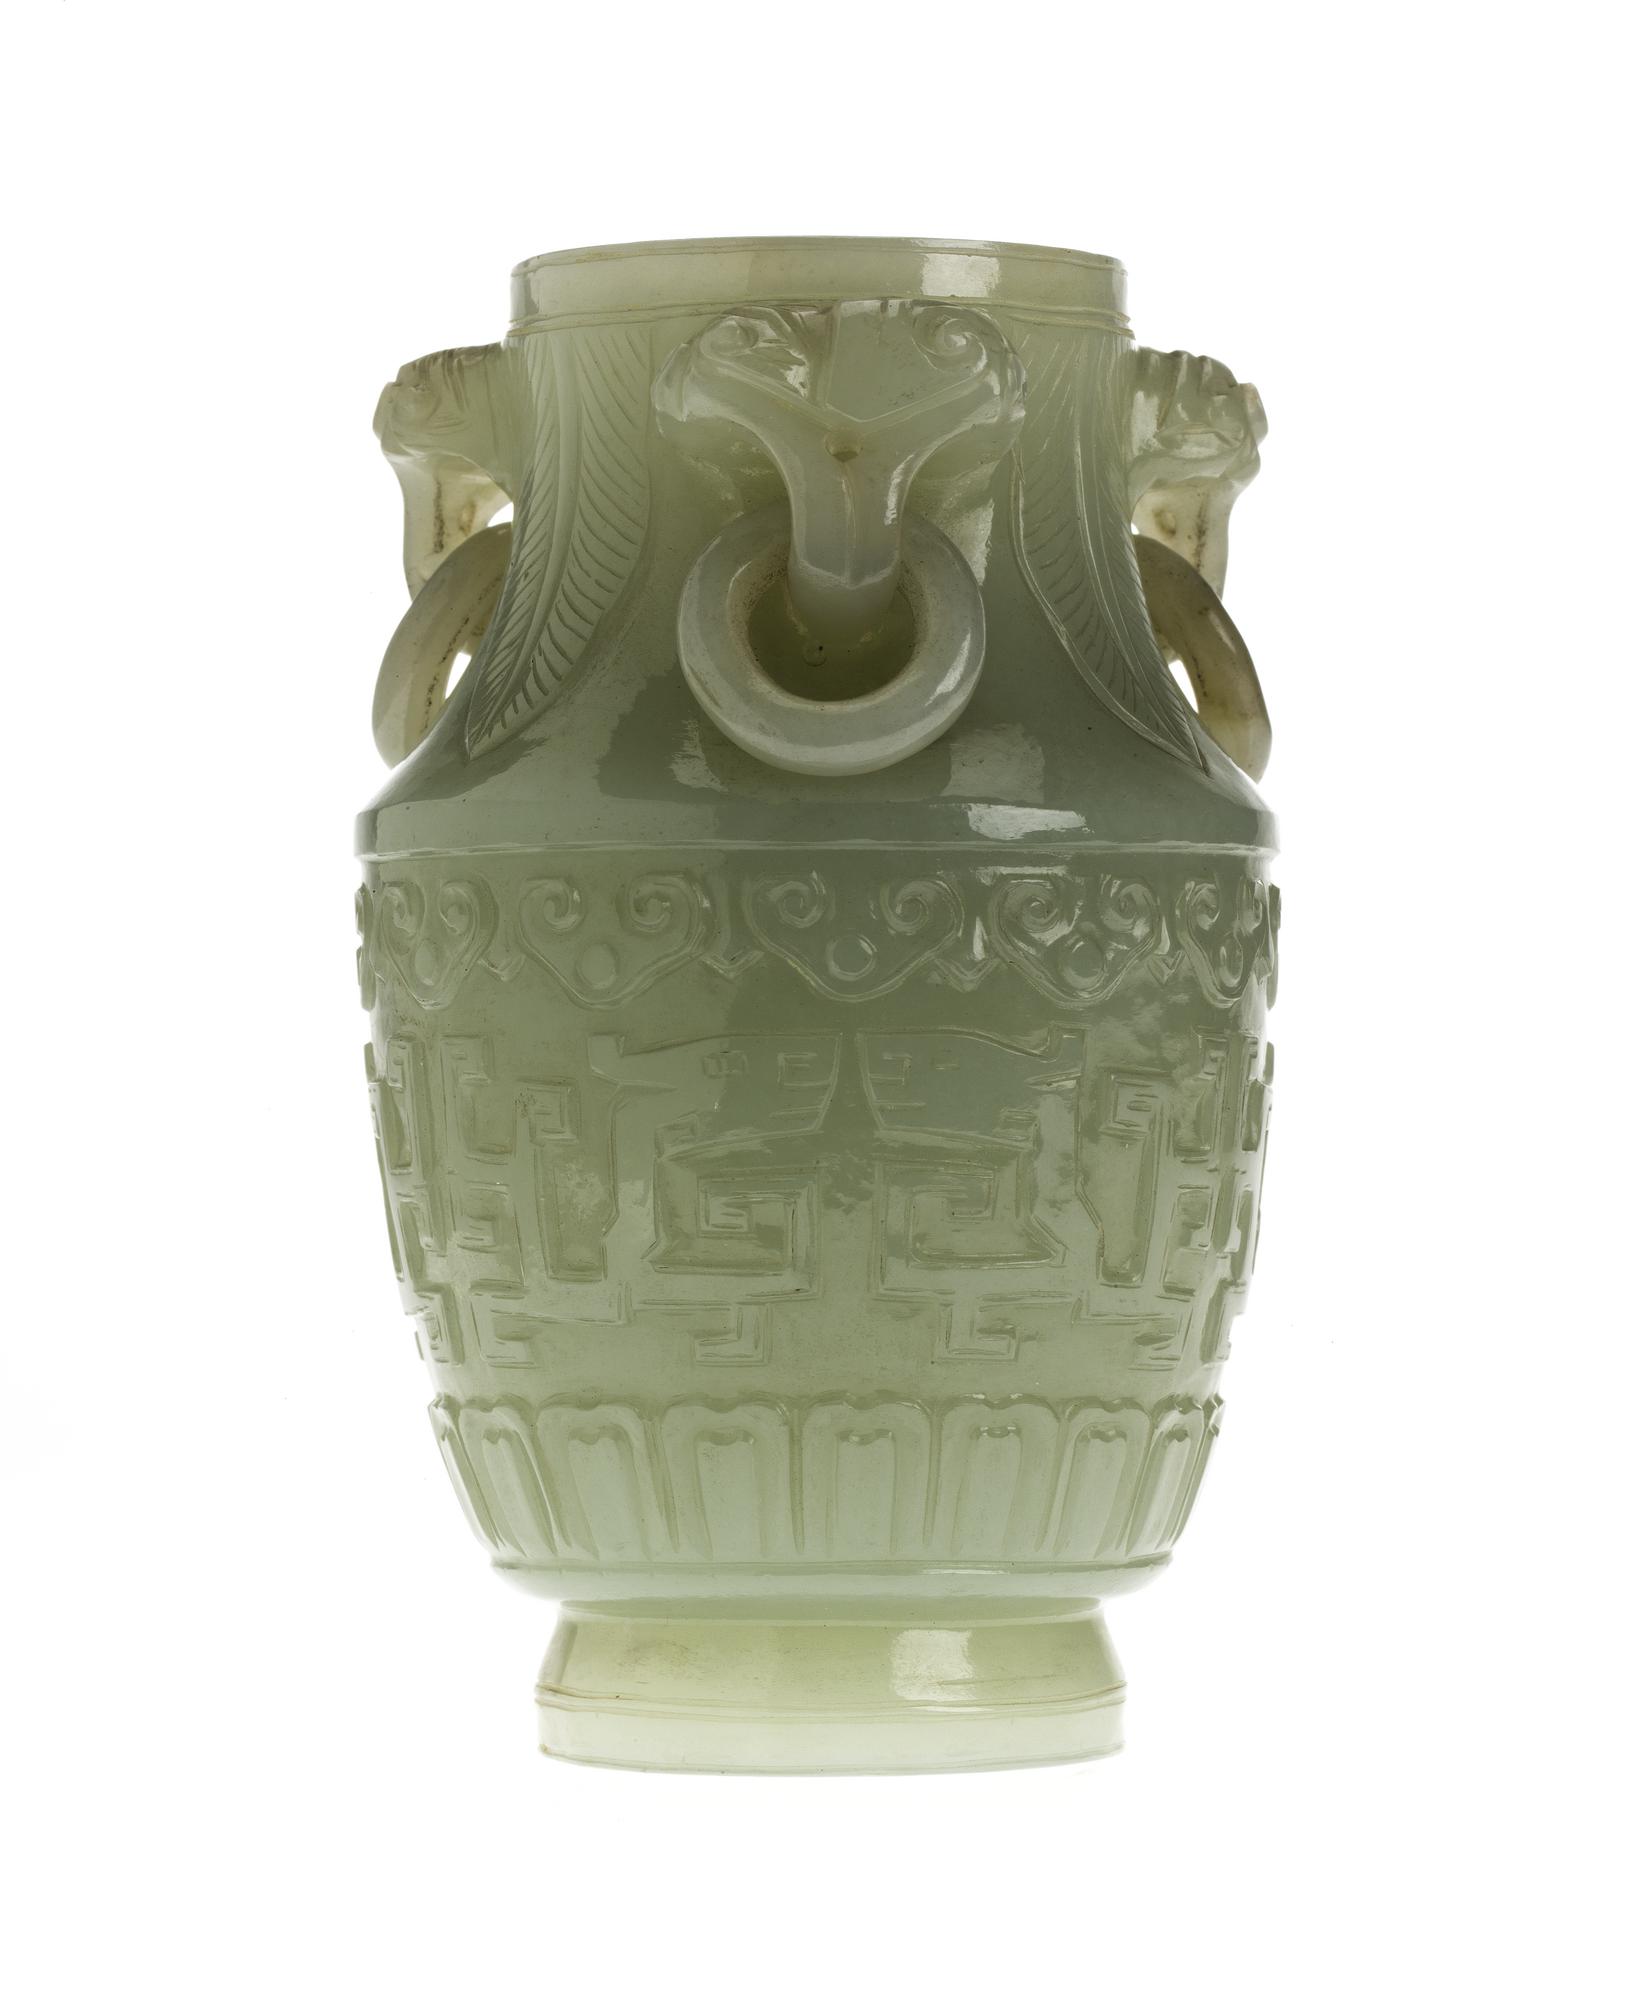 Vase of mutton-fat jade with three loose ring handles, carved with symmetrical designs of archaic dragons: China, 18th century.